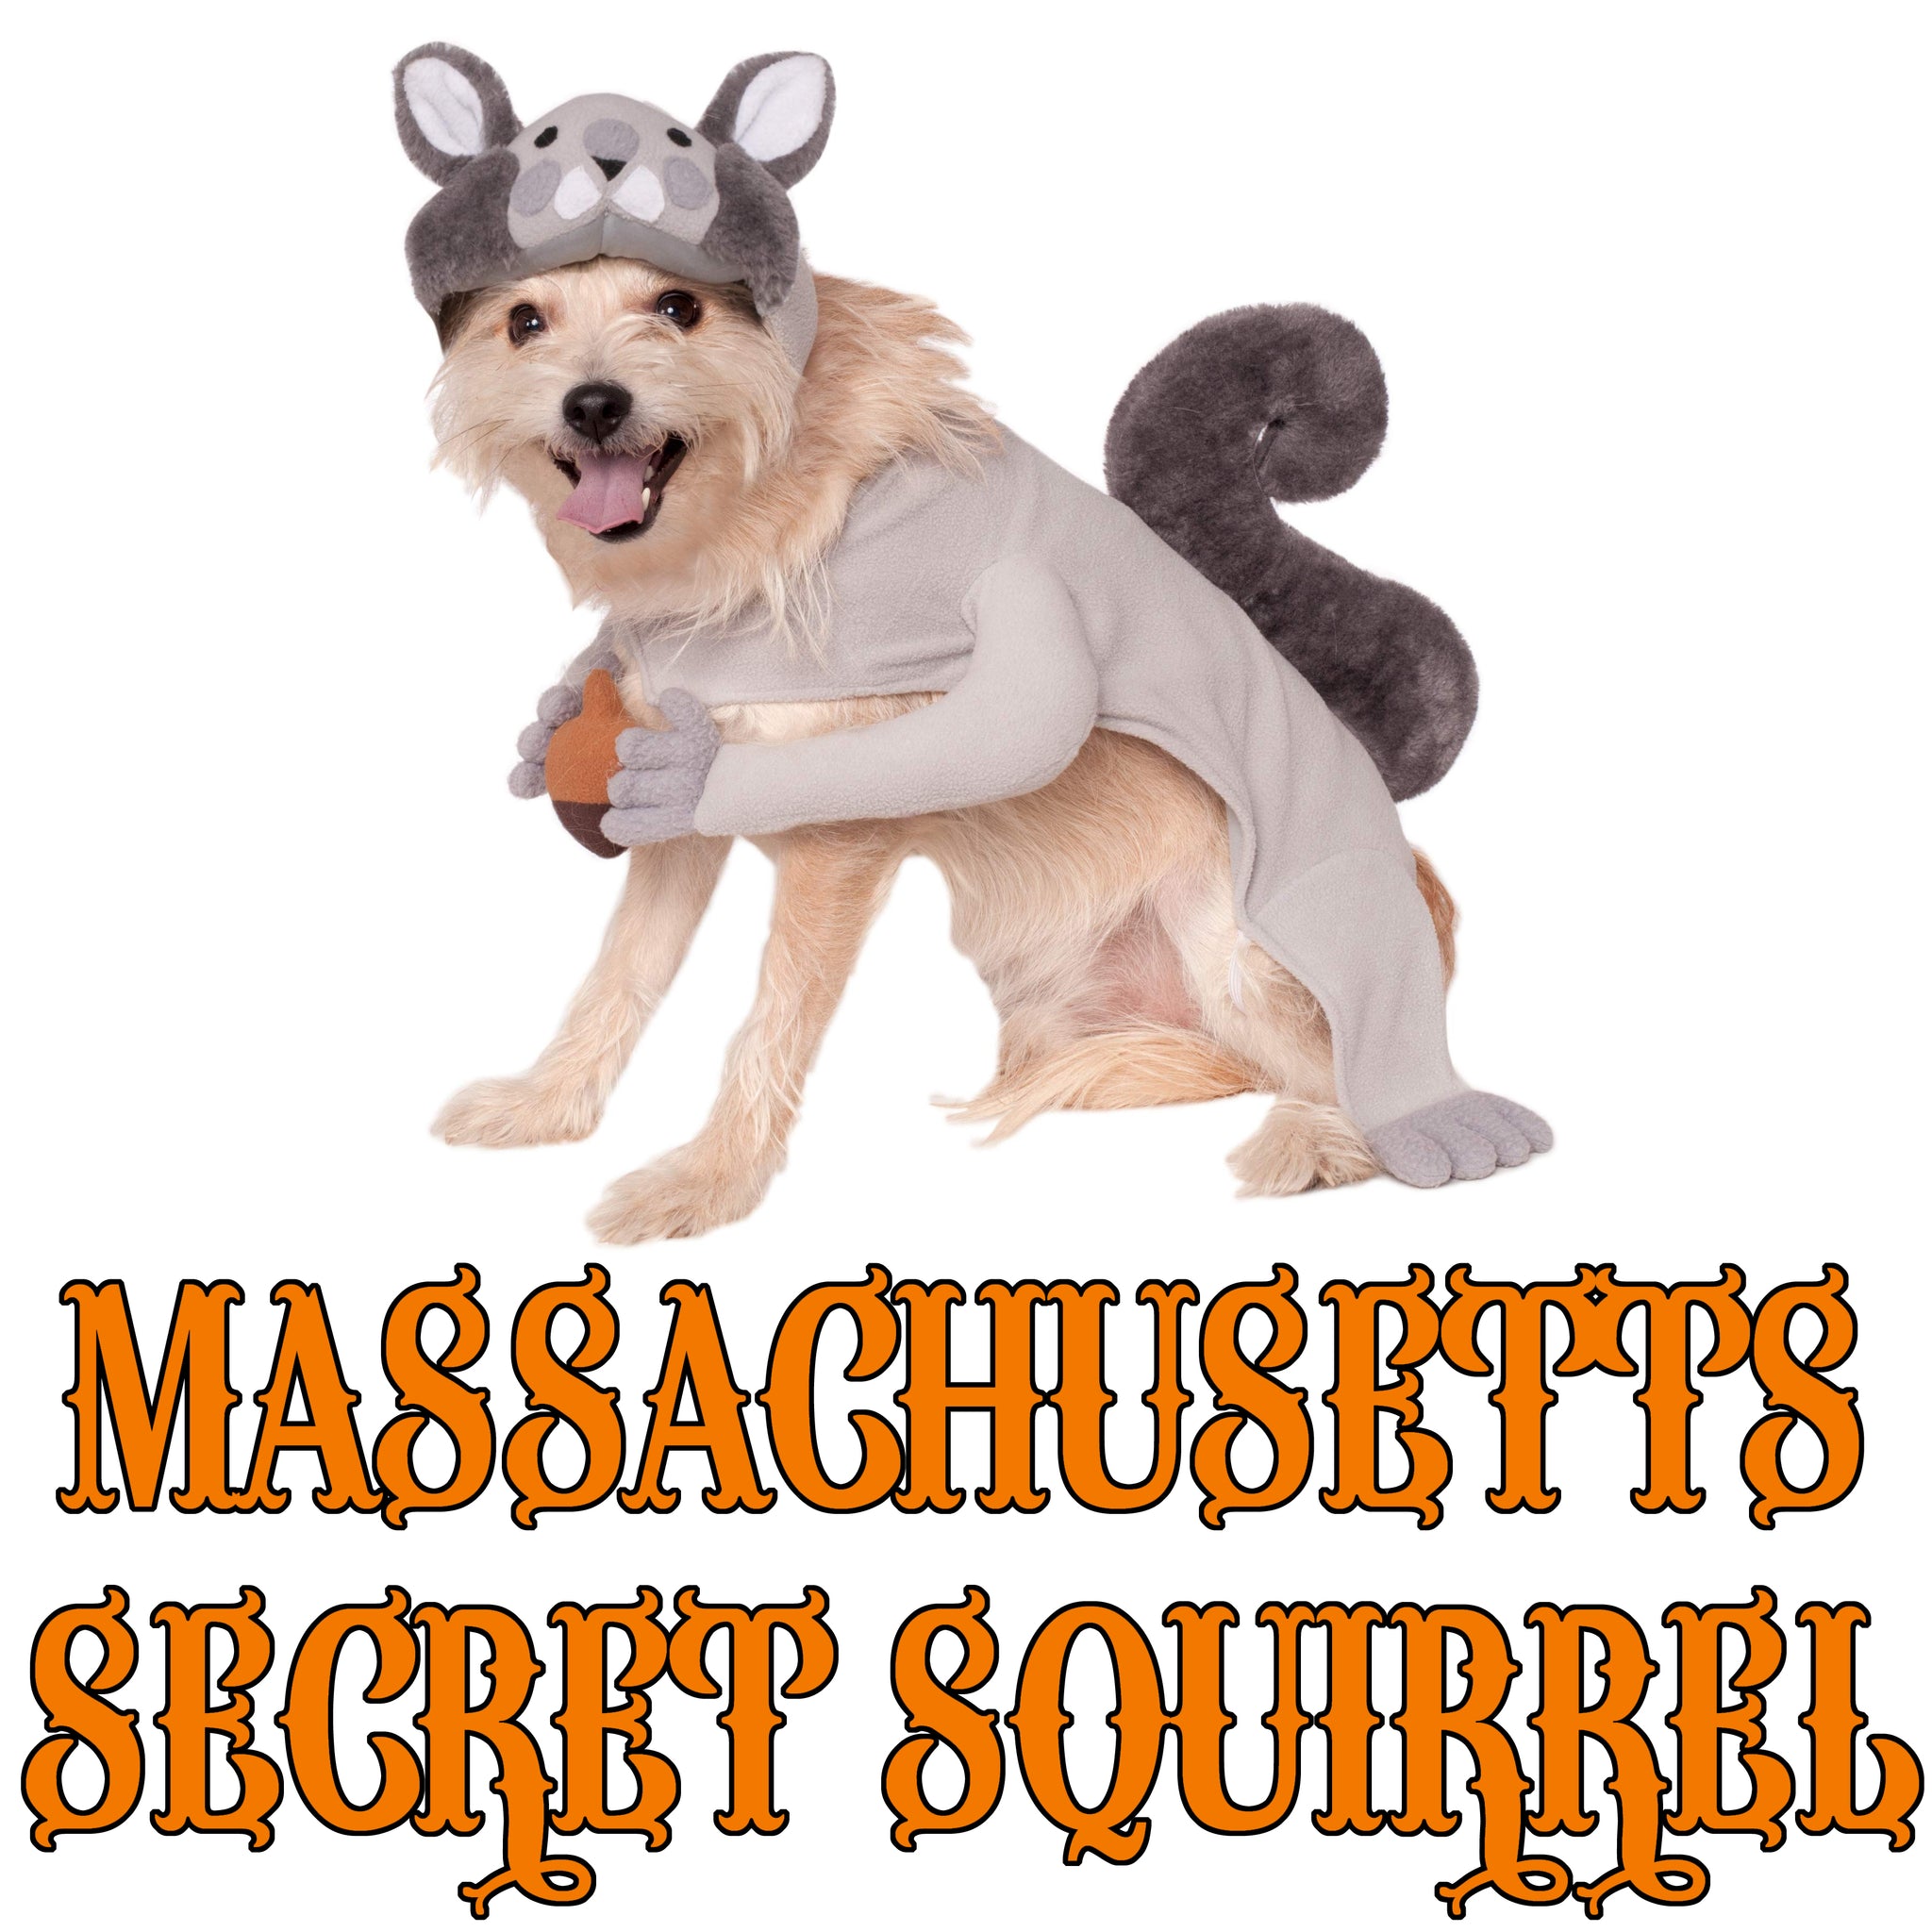 Massachusetts Police K9 Secret Squirrel - ONLY 30 available